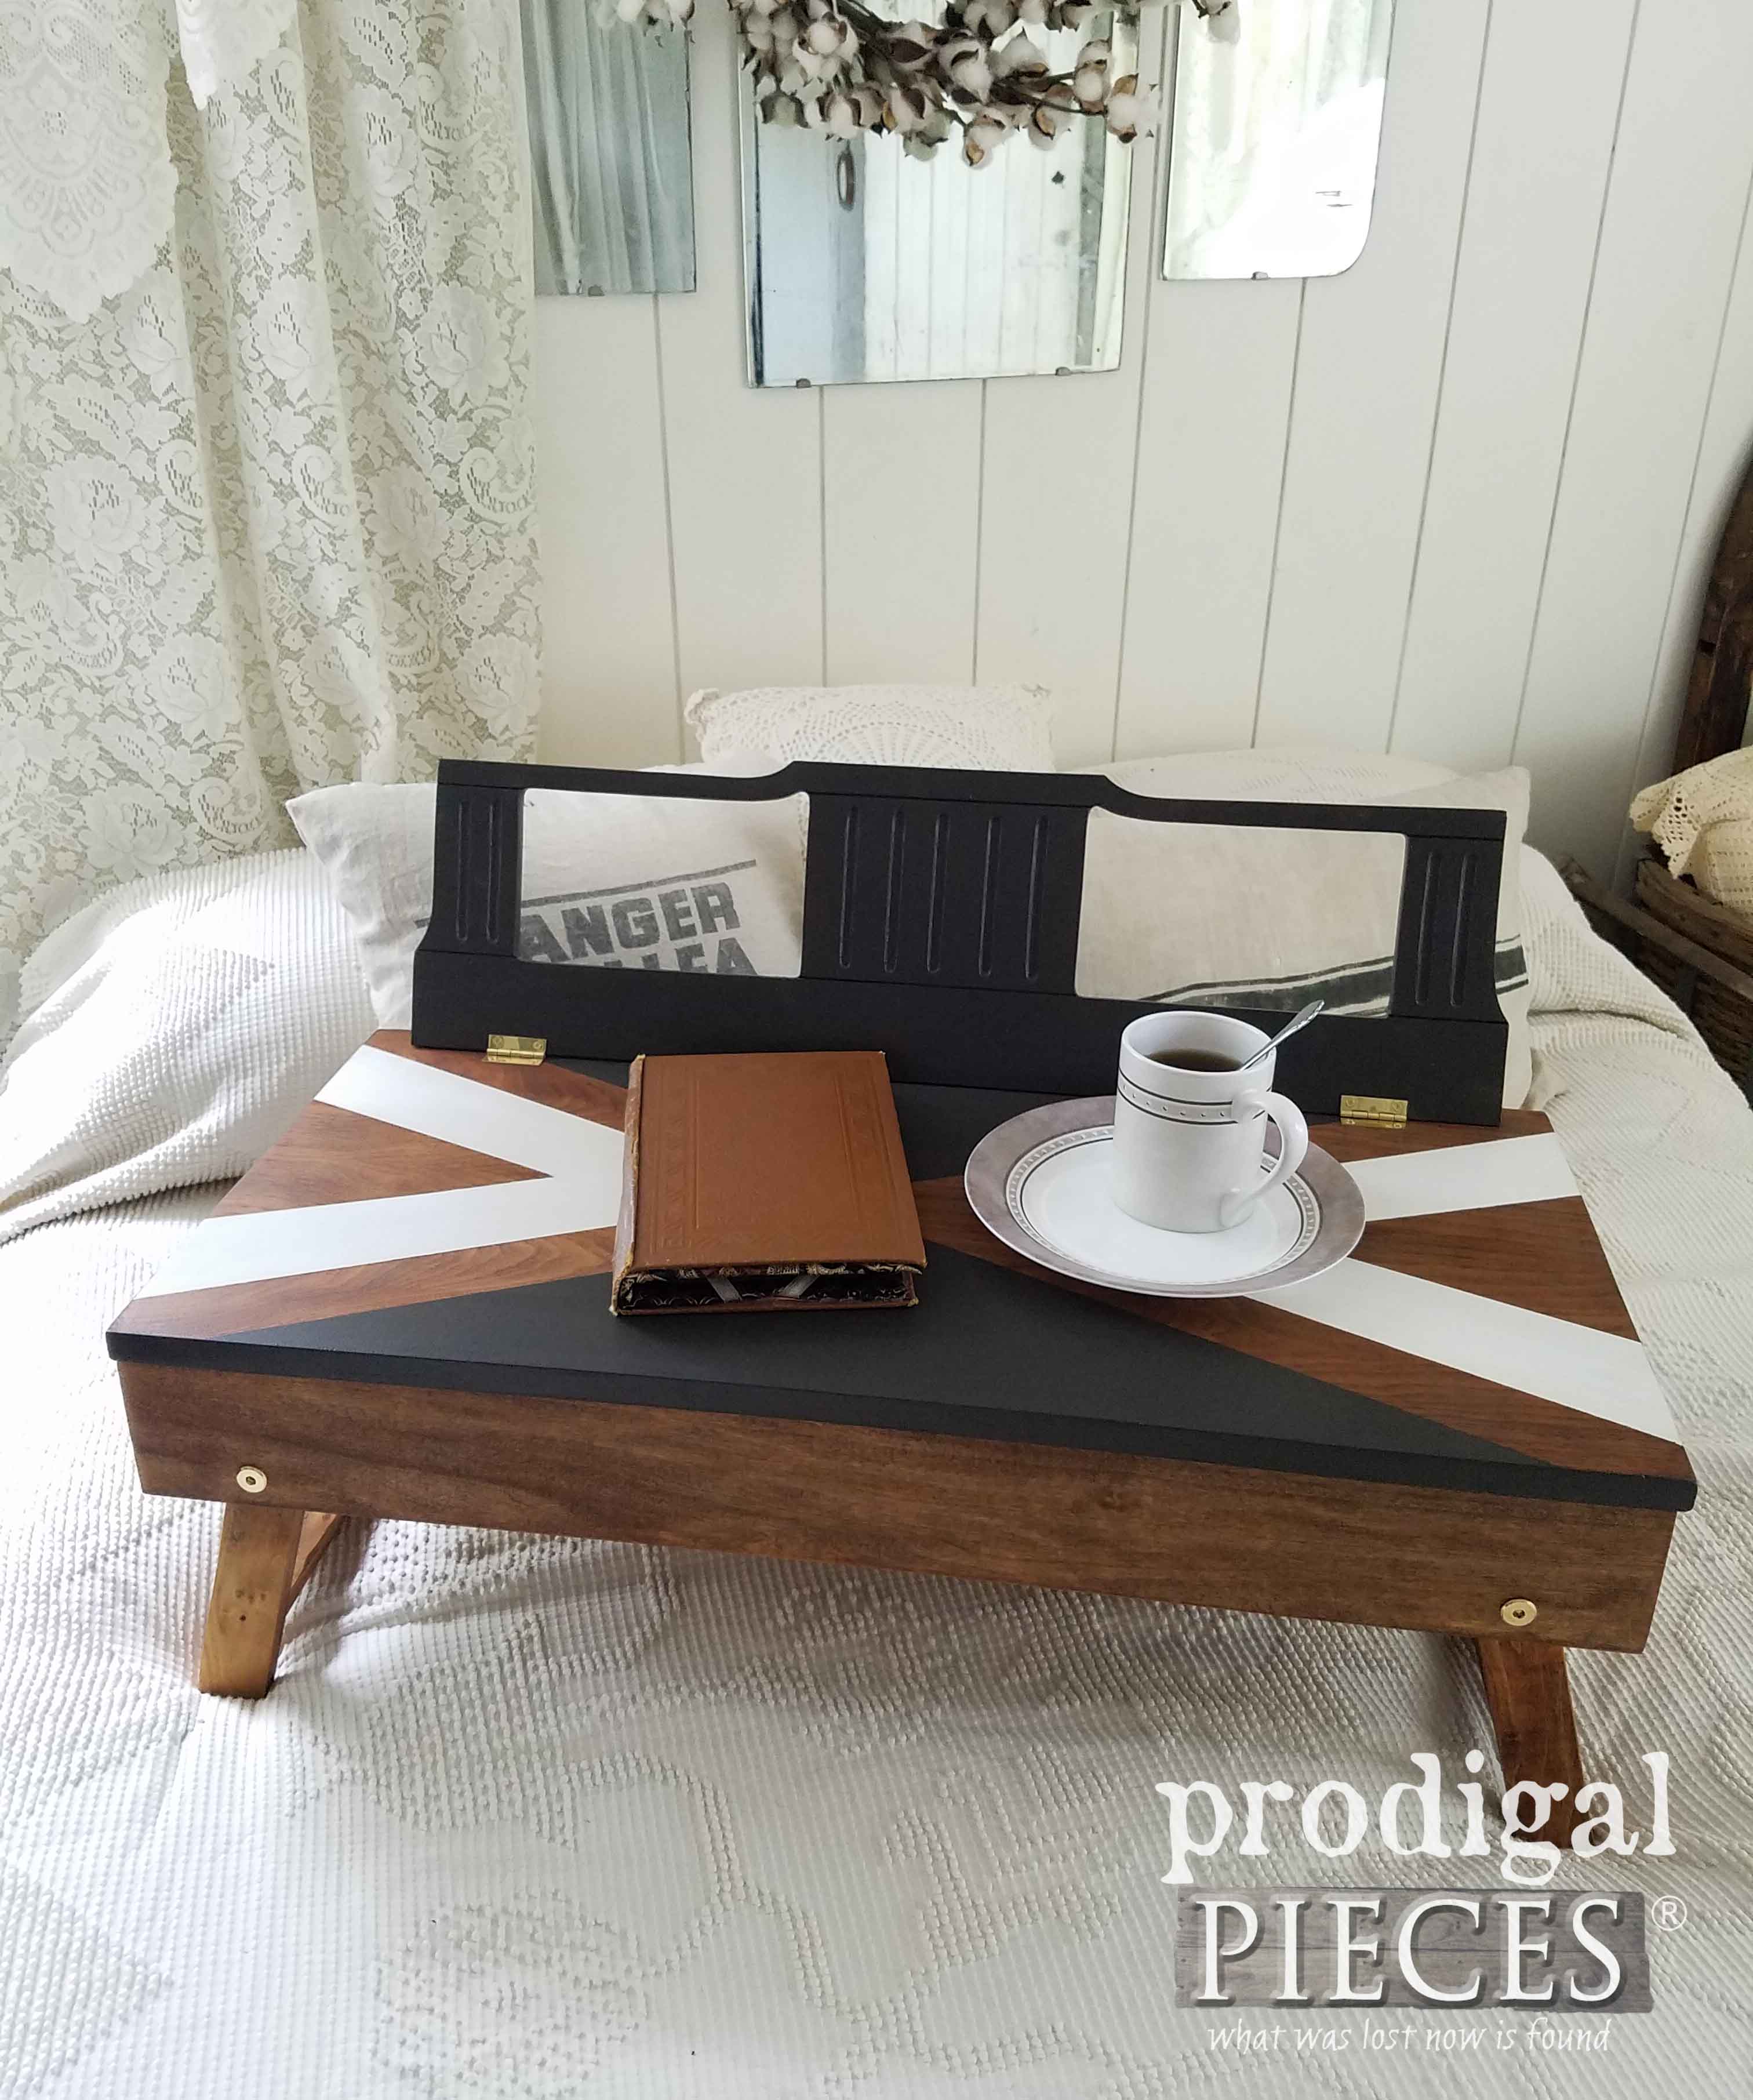 DIY Upcycled Lap Desk from Piano Bench and Music Rest by Prodigal Pieces | prodigalpieces.com